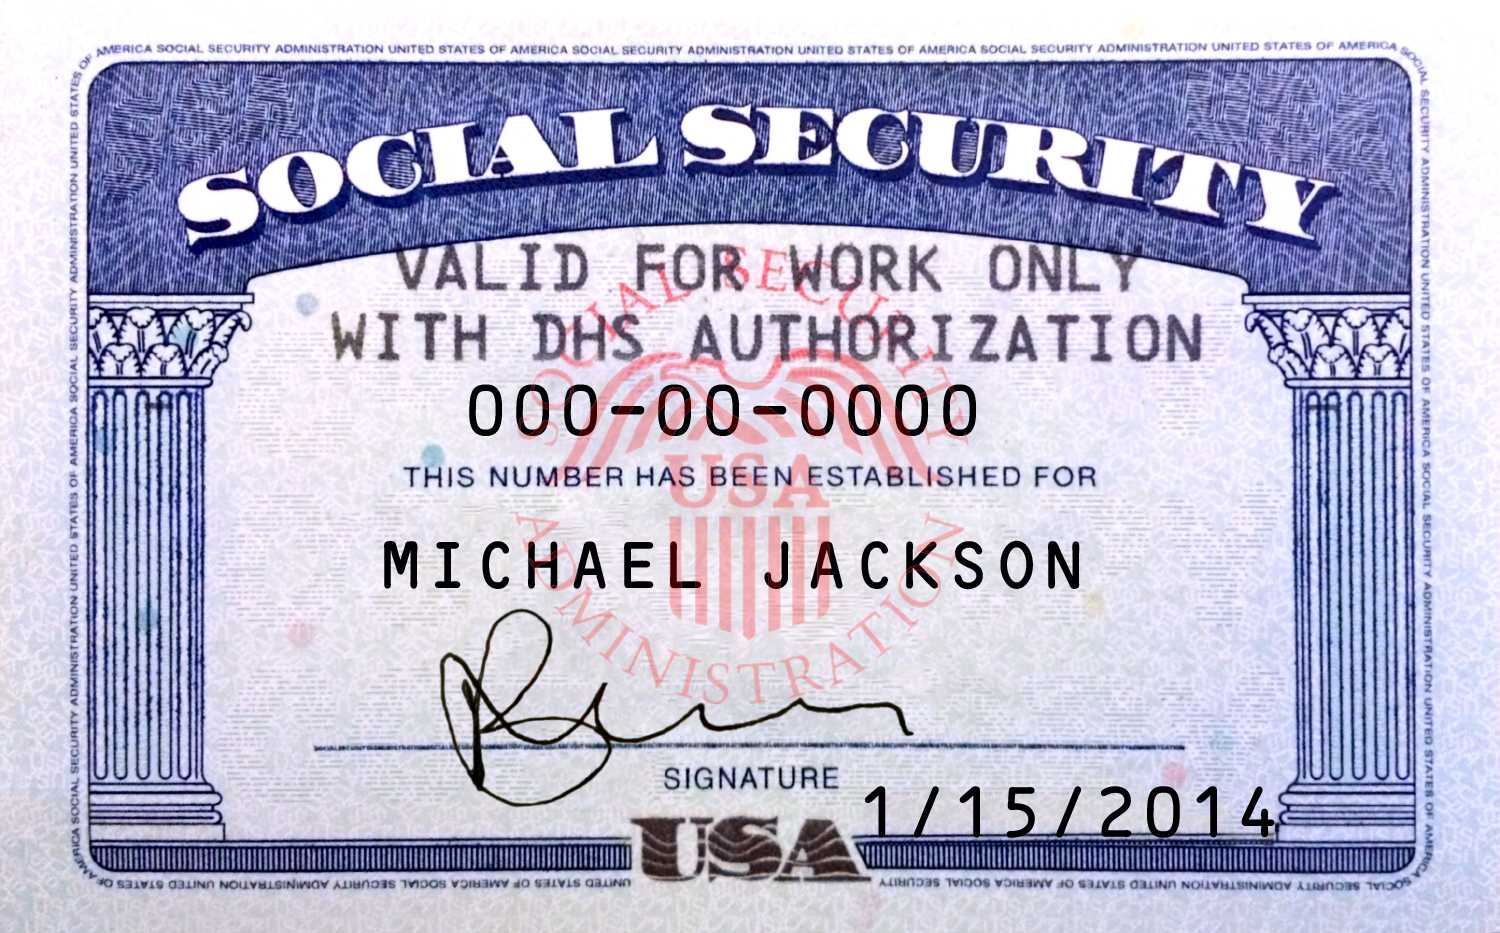 61 [Pdf] Social Security Number 765 Generator Printable Hd Within Social Security Card Template Pdf